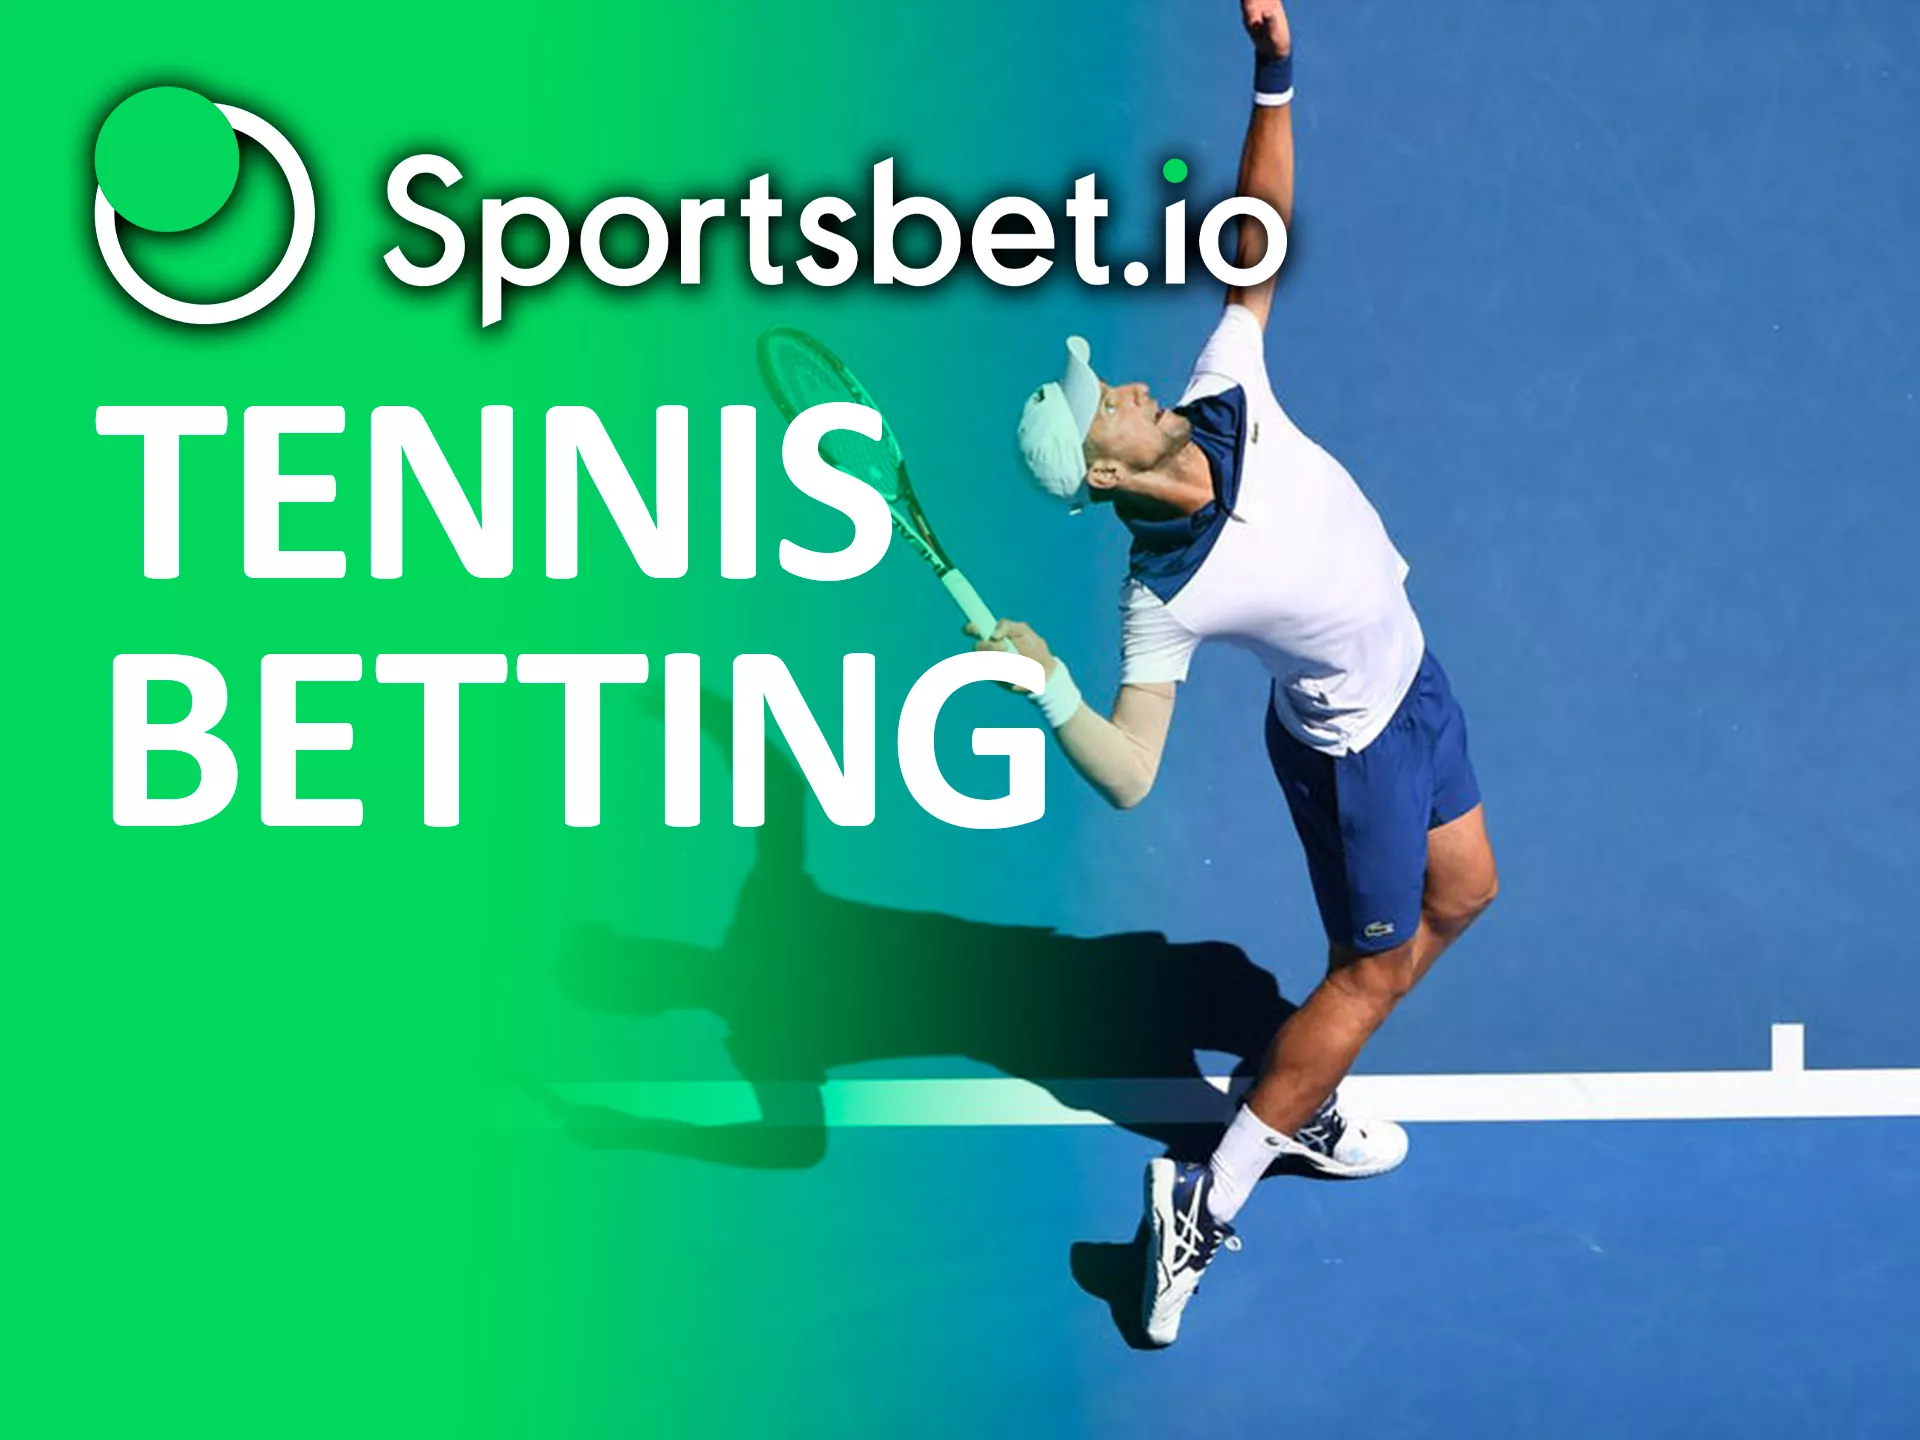 You can alsoplace bets on tennis events.